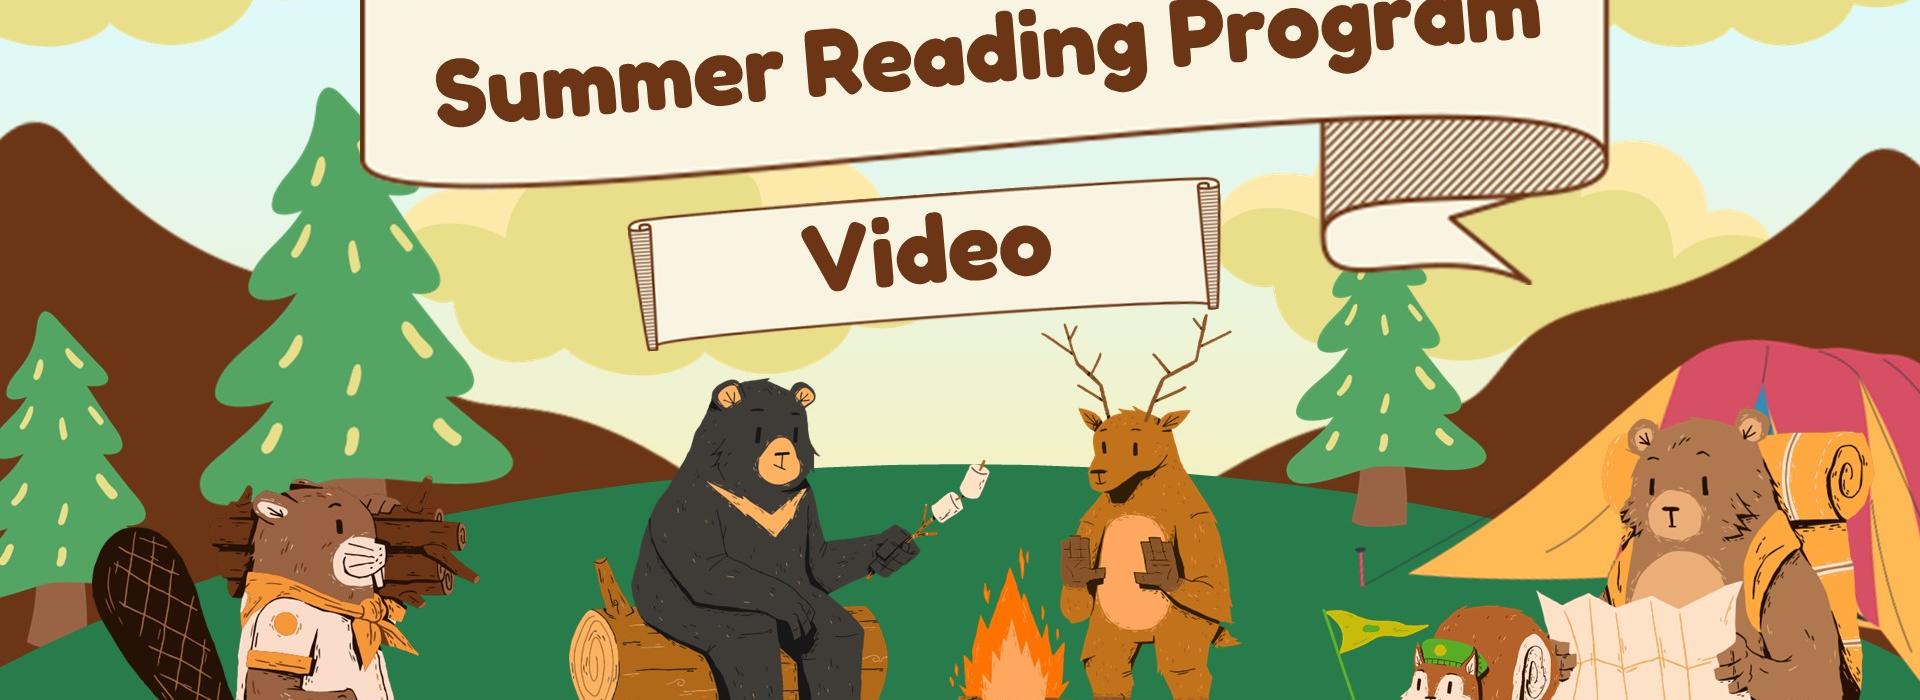 Watch our Summer Reading Program Video Here!